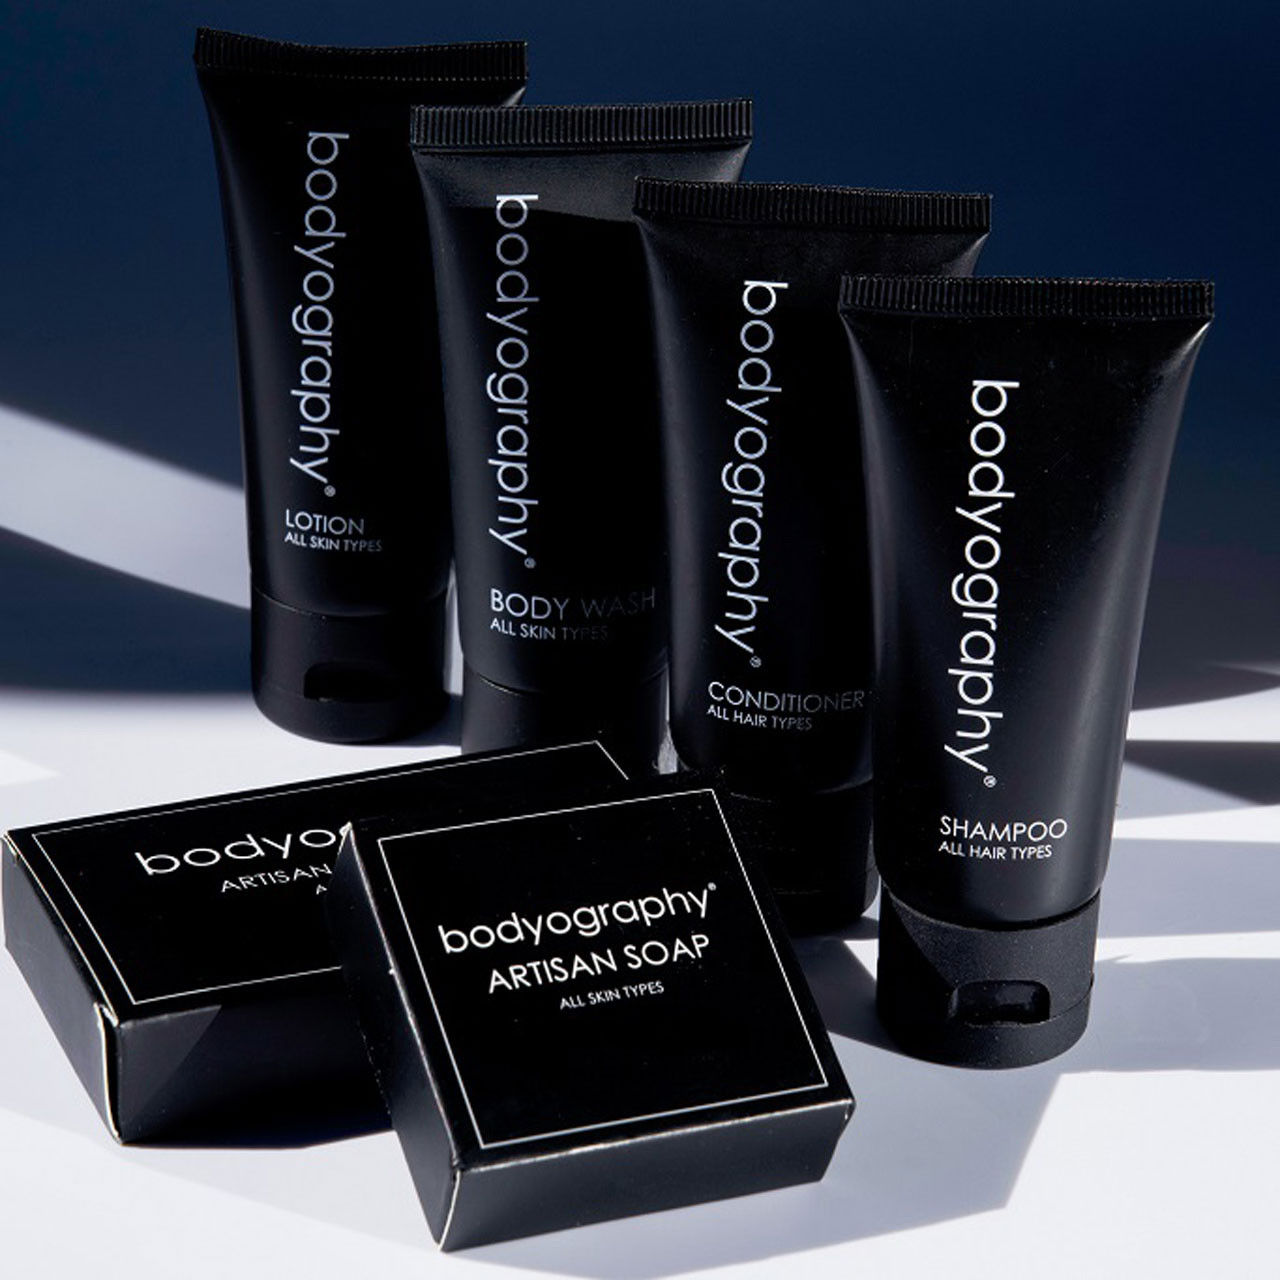 How does the skin feel after using Bodyography shampoo from the Hotel collection?